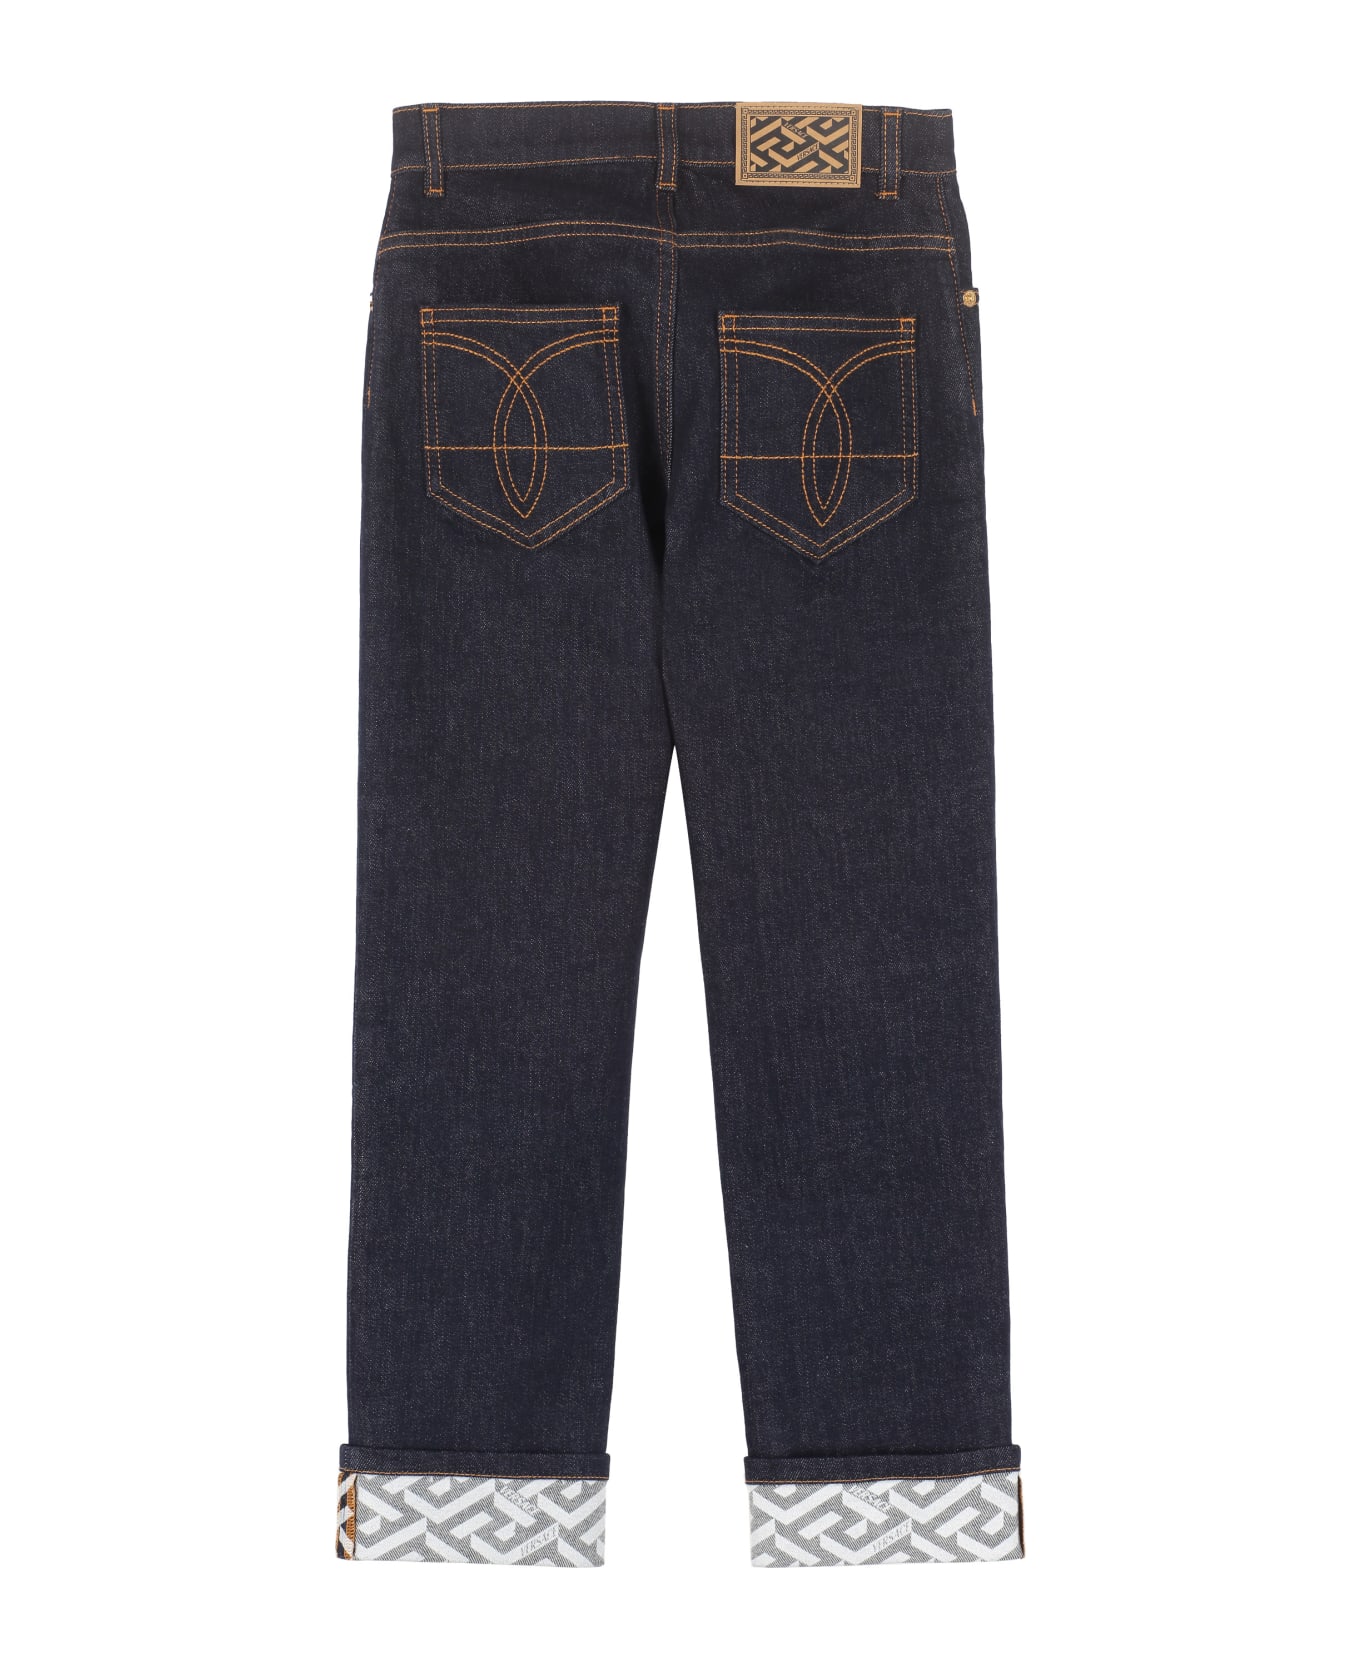 Young Versace Slim Fit Jeans - Denim ボトムス